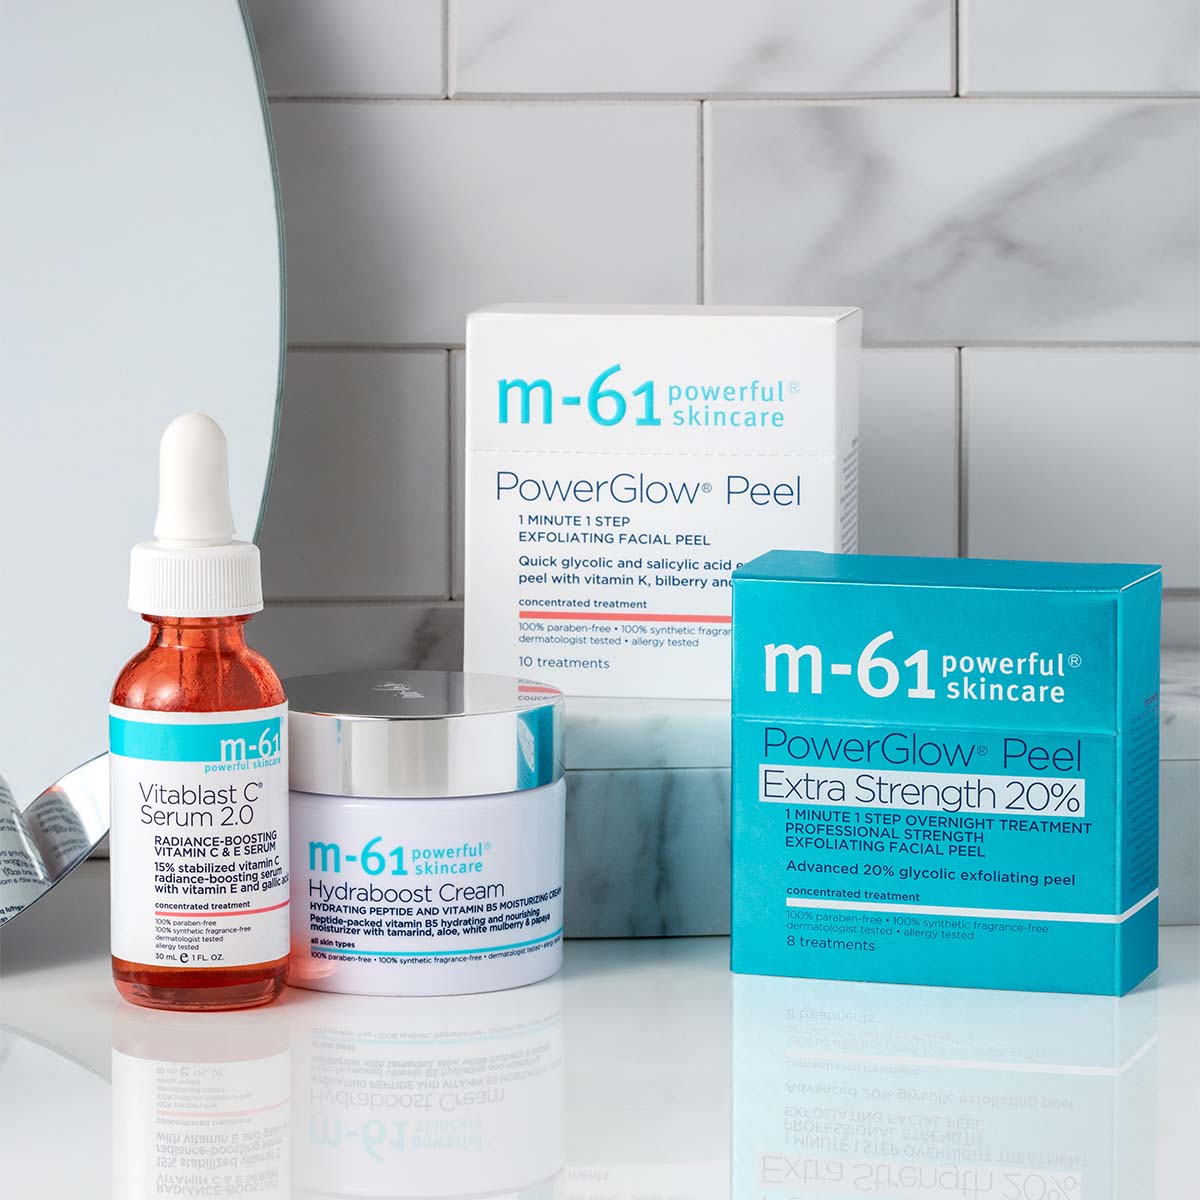 M-61 family of products